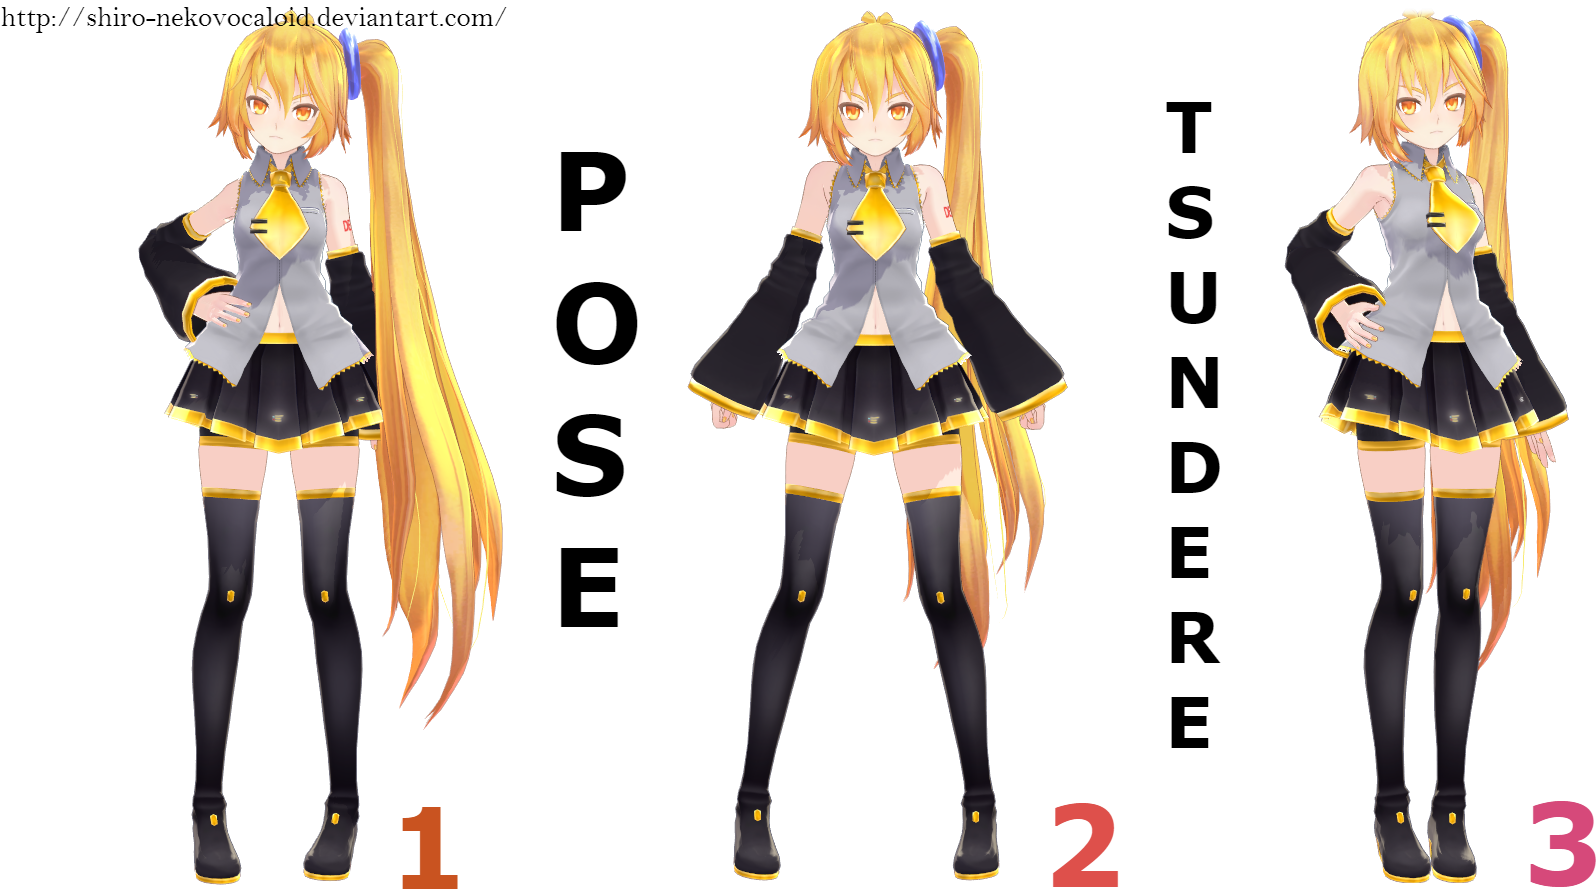 Tsundere Poses download 150 Watchers By Shiro-nekovocaloid - Mmd Pose Dl.